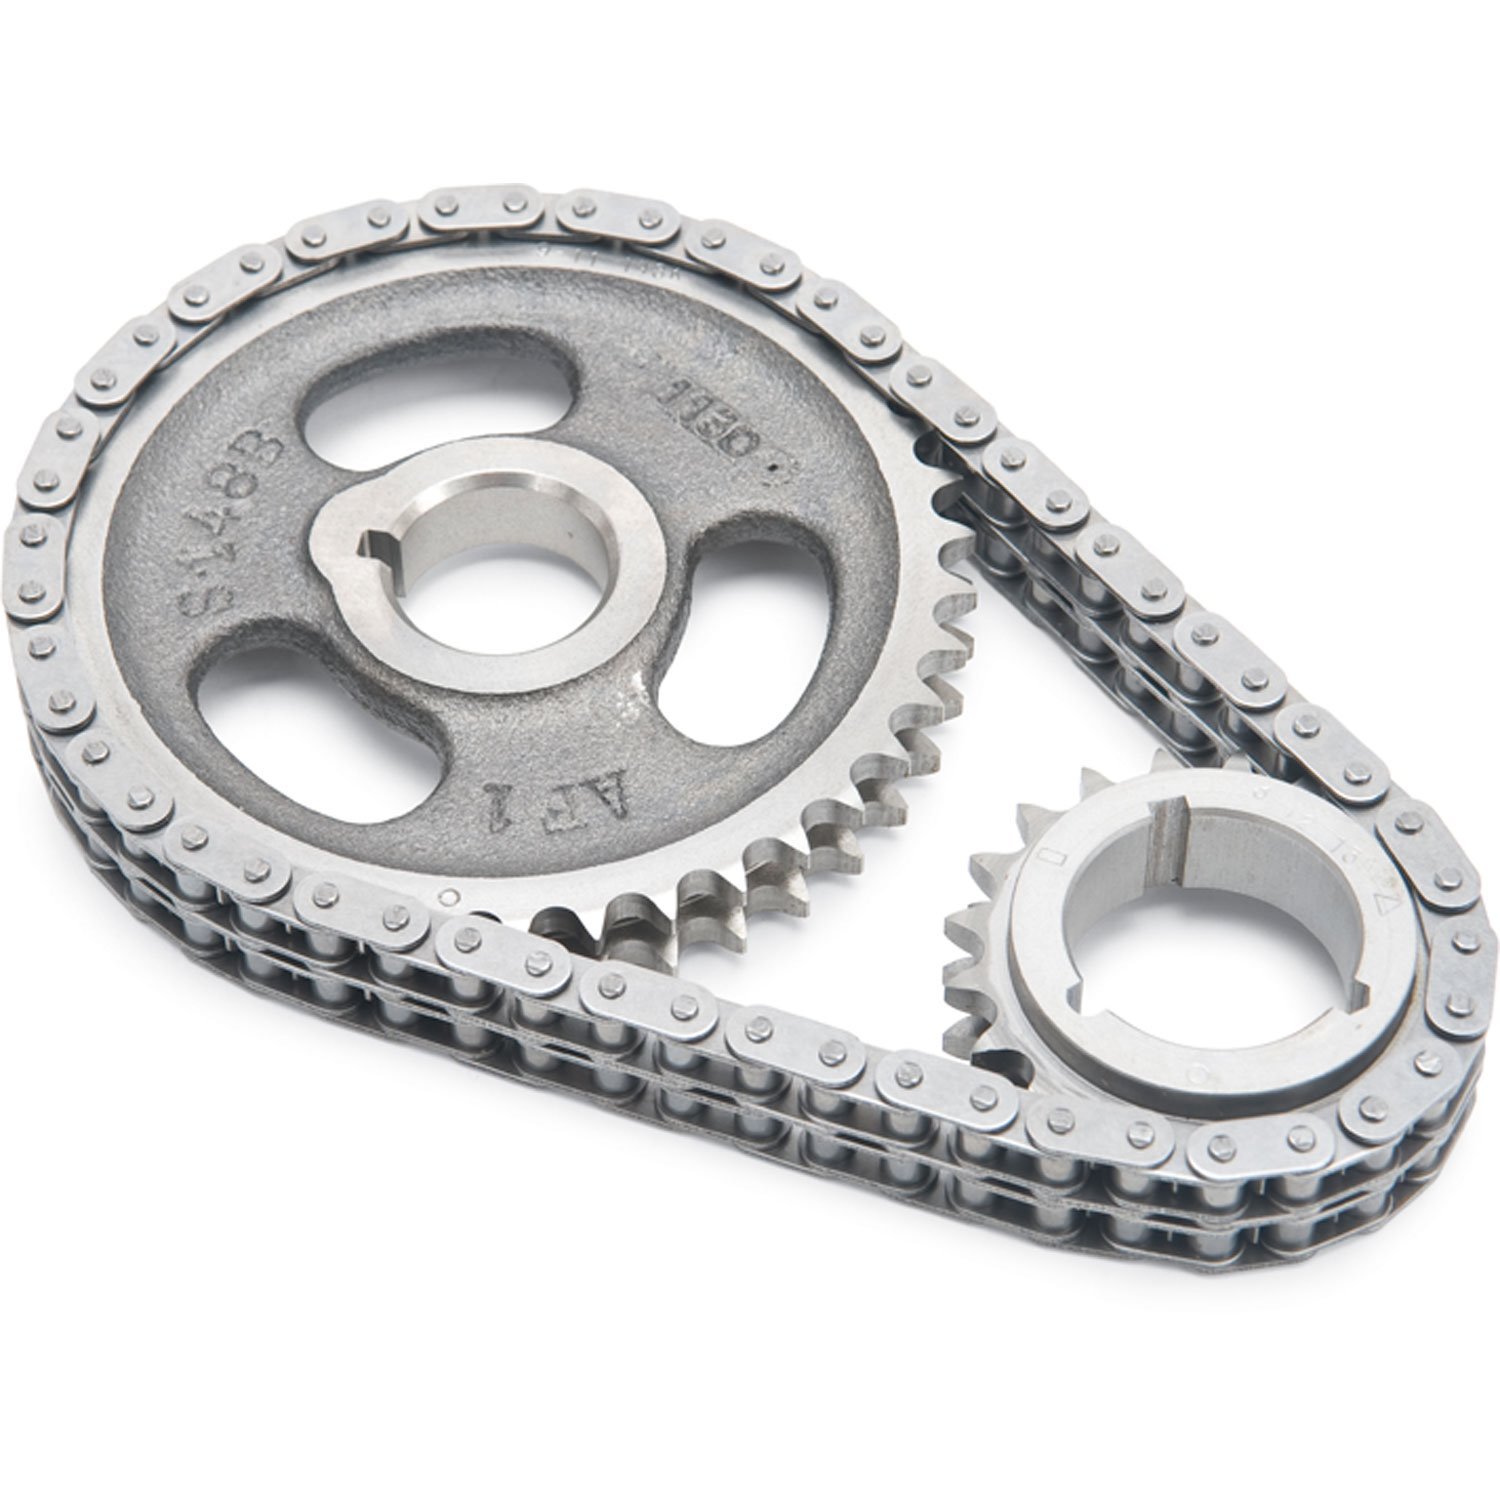 Performer-Link Timing Chain Set for Buick, Oldsmobile, and